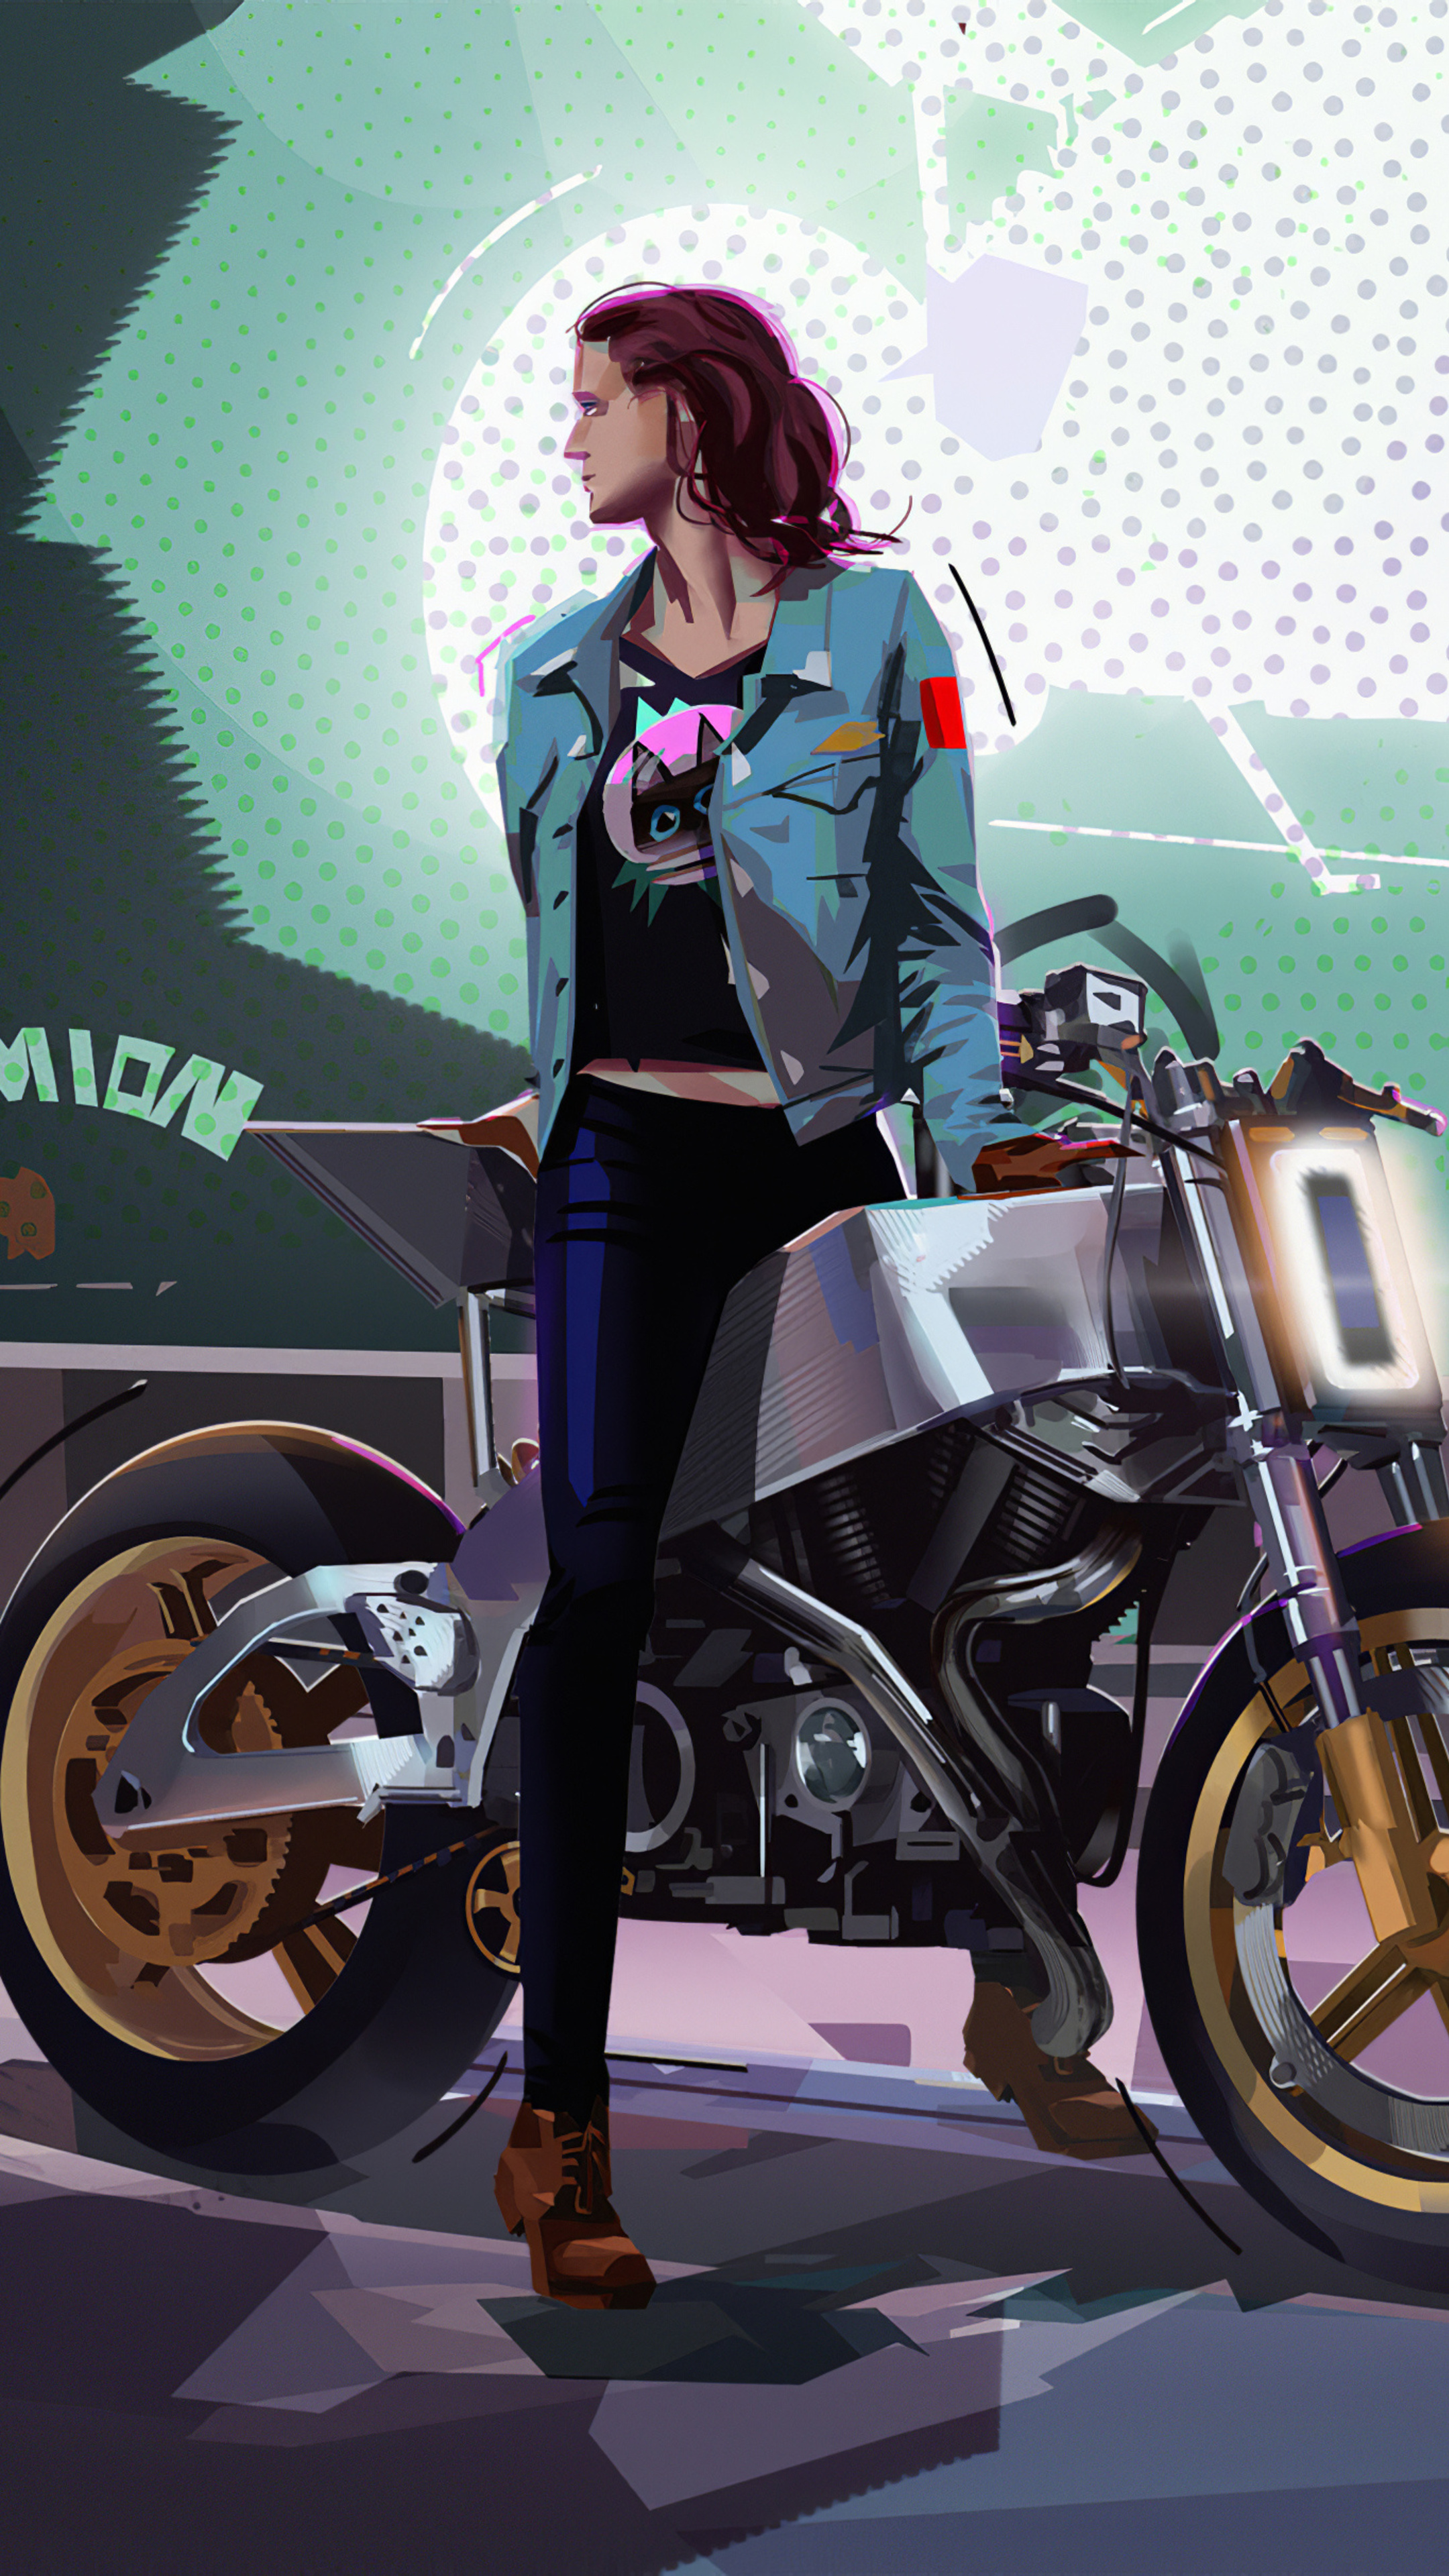 2160x3840 Bike Rider Girl 4k Sony Xperia X,XZ,Z5 Premium HD 4k Wallpapers,  Images, Backgrounds, Photos and Pictures